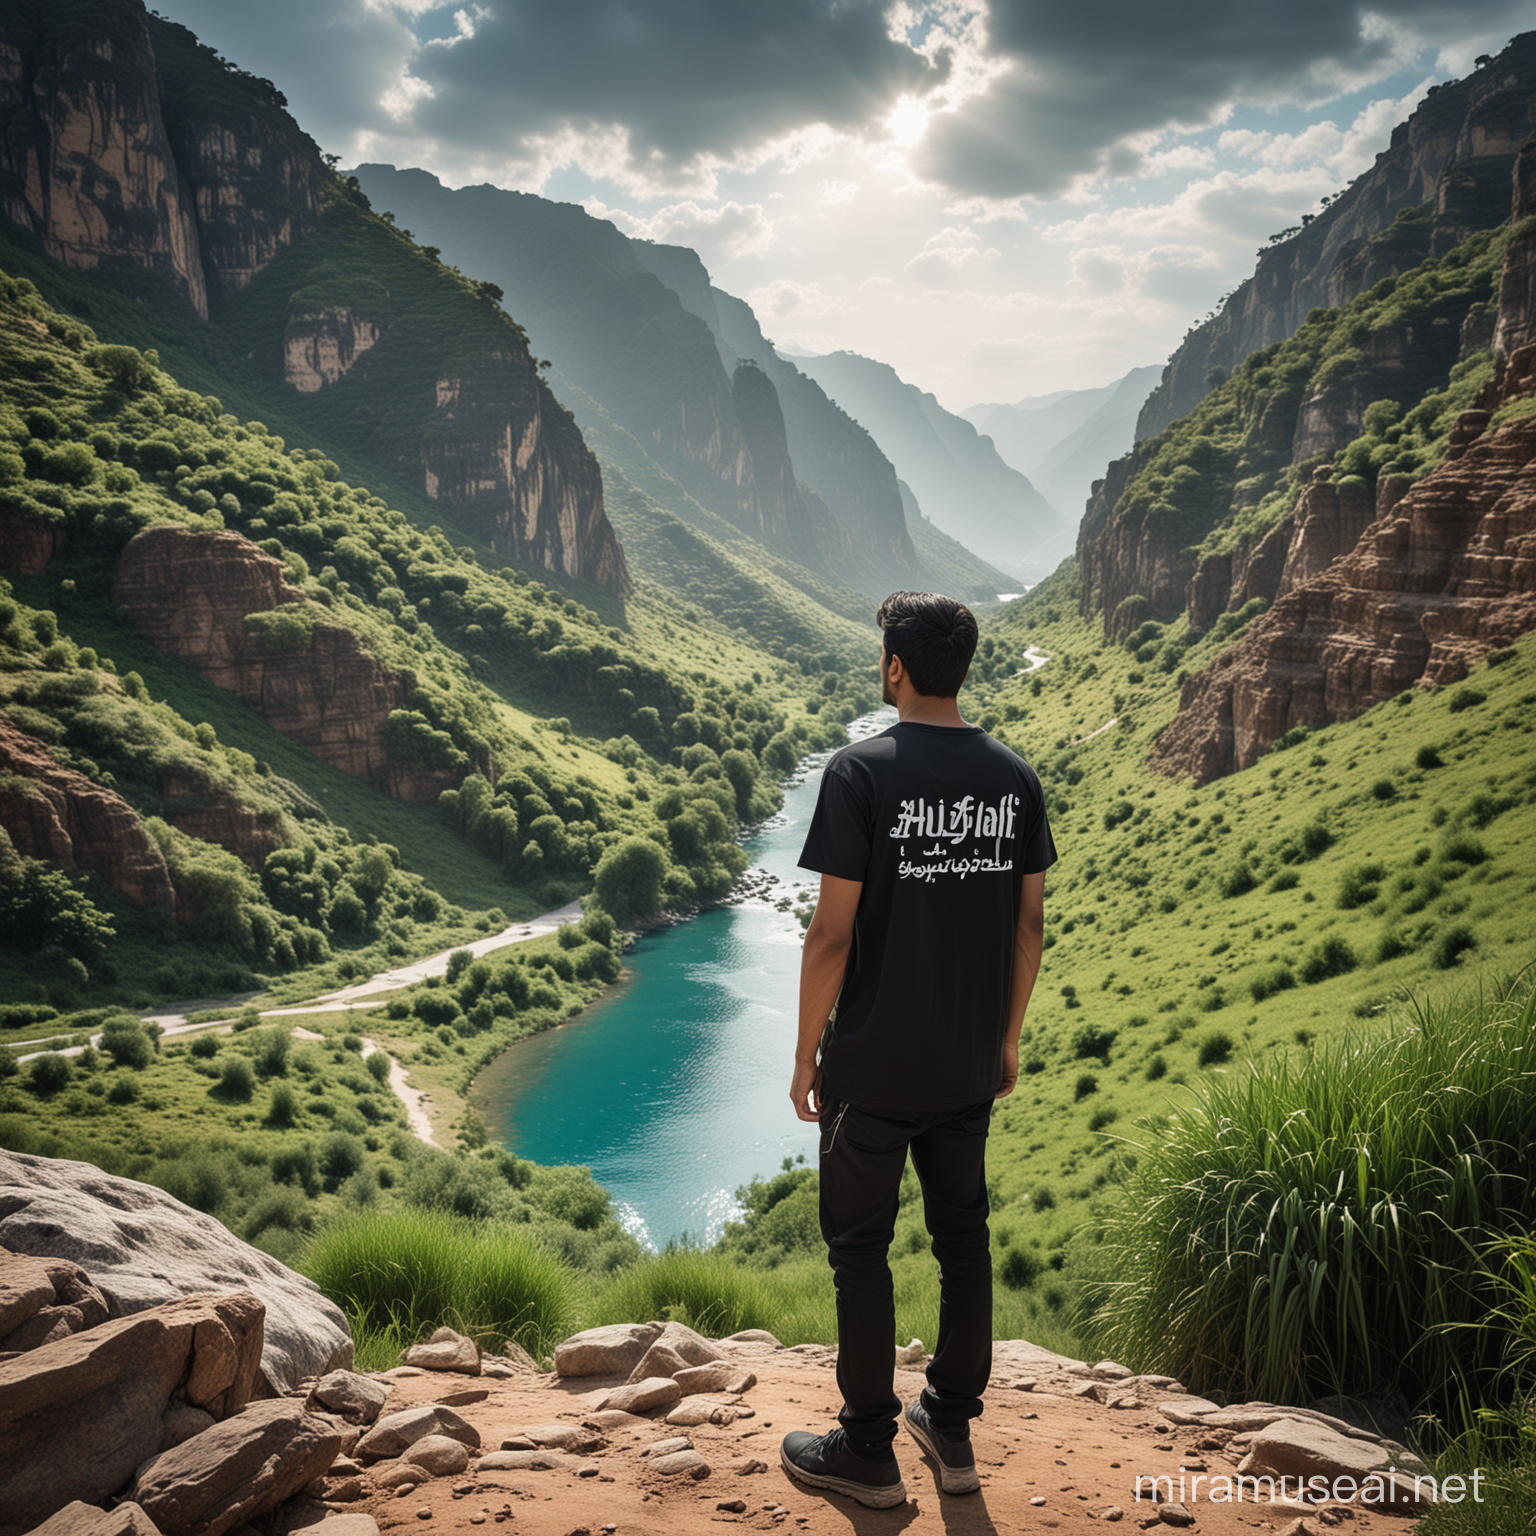 Generate an image depicting a confident man aged 23 standing at the edge of a mountain, facing a picturesque landscape. He is clean shaved, his hand on his pocket and is wearing a black t-shirt with the name 'HUZAIFA' written in white font on the back. The man, Huzaifa, is deeply contemplating his bright future while gazing at the beautiful scenery ahead, which includes a blue water river, green grass, and trees. The perspective of the image should be from behind Huzaifa, capturing the entirety of the stunning landscape in front of him.